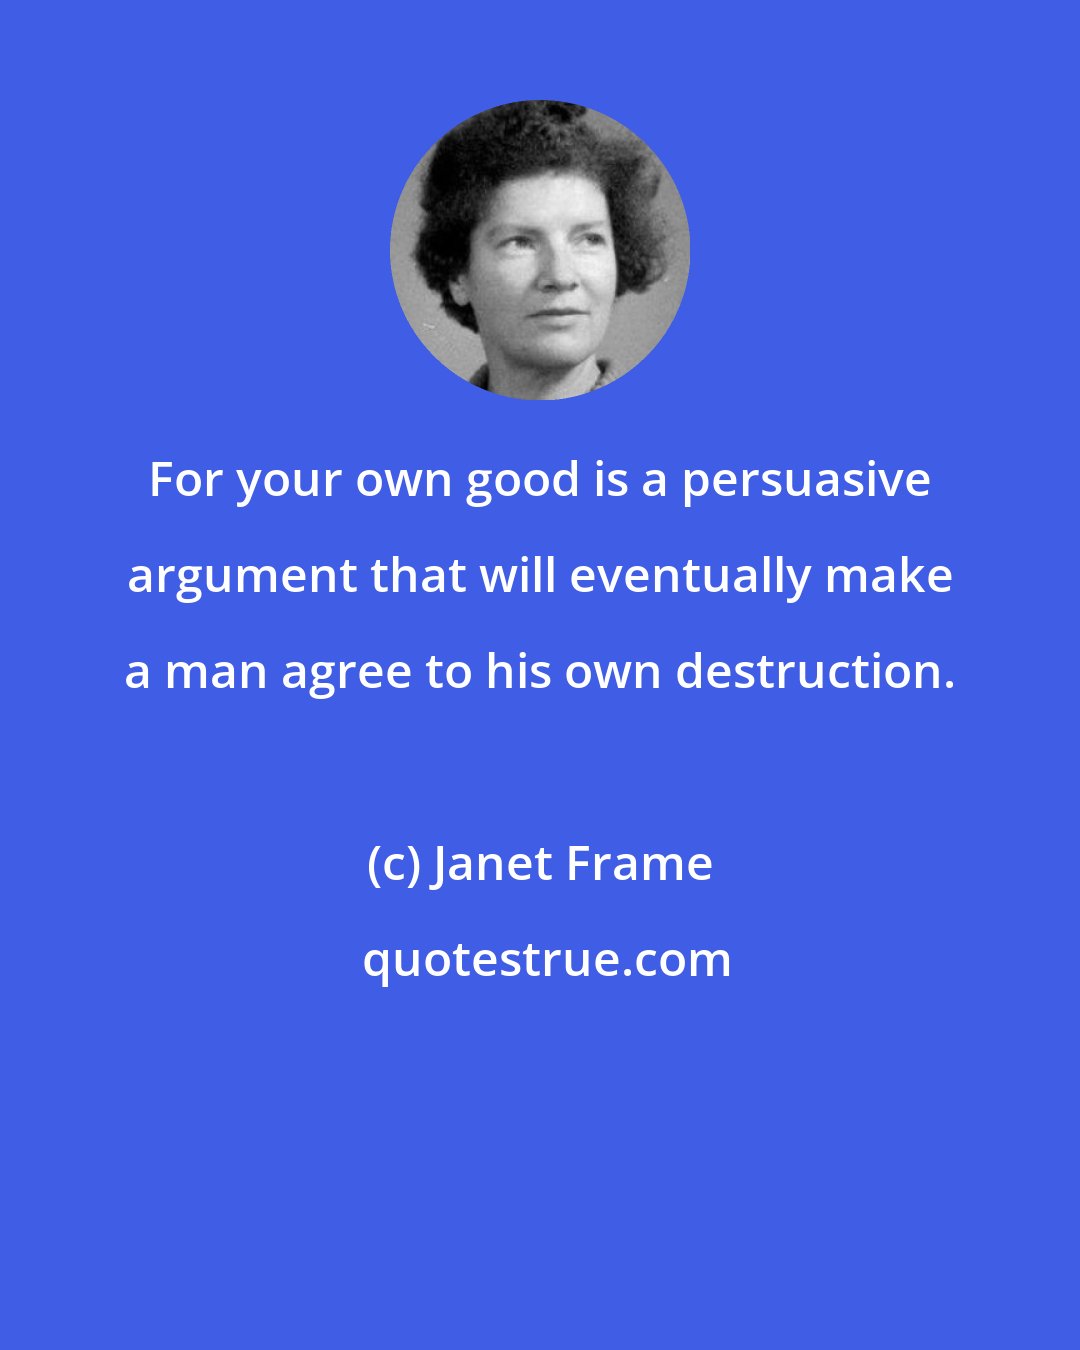 Janet Frame: For your own good is a persuasive argument that will eventually make a man agree to his own destruction.